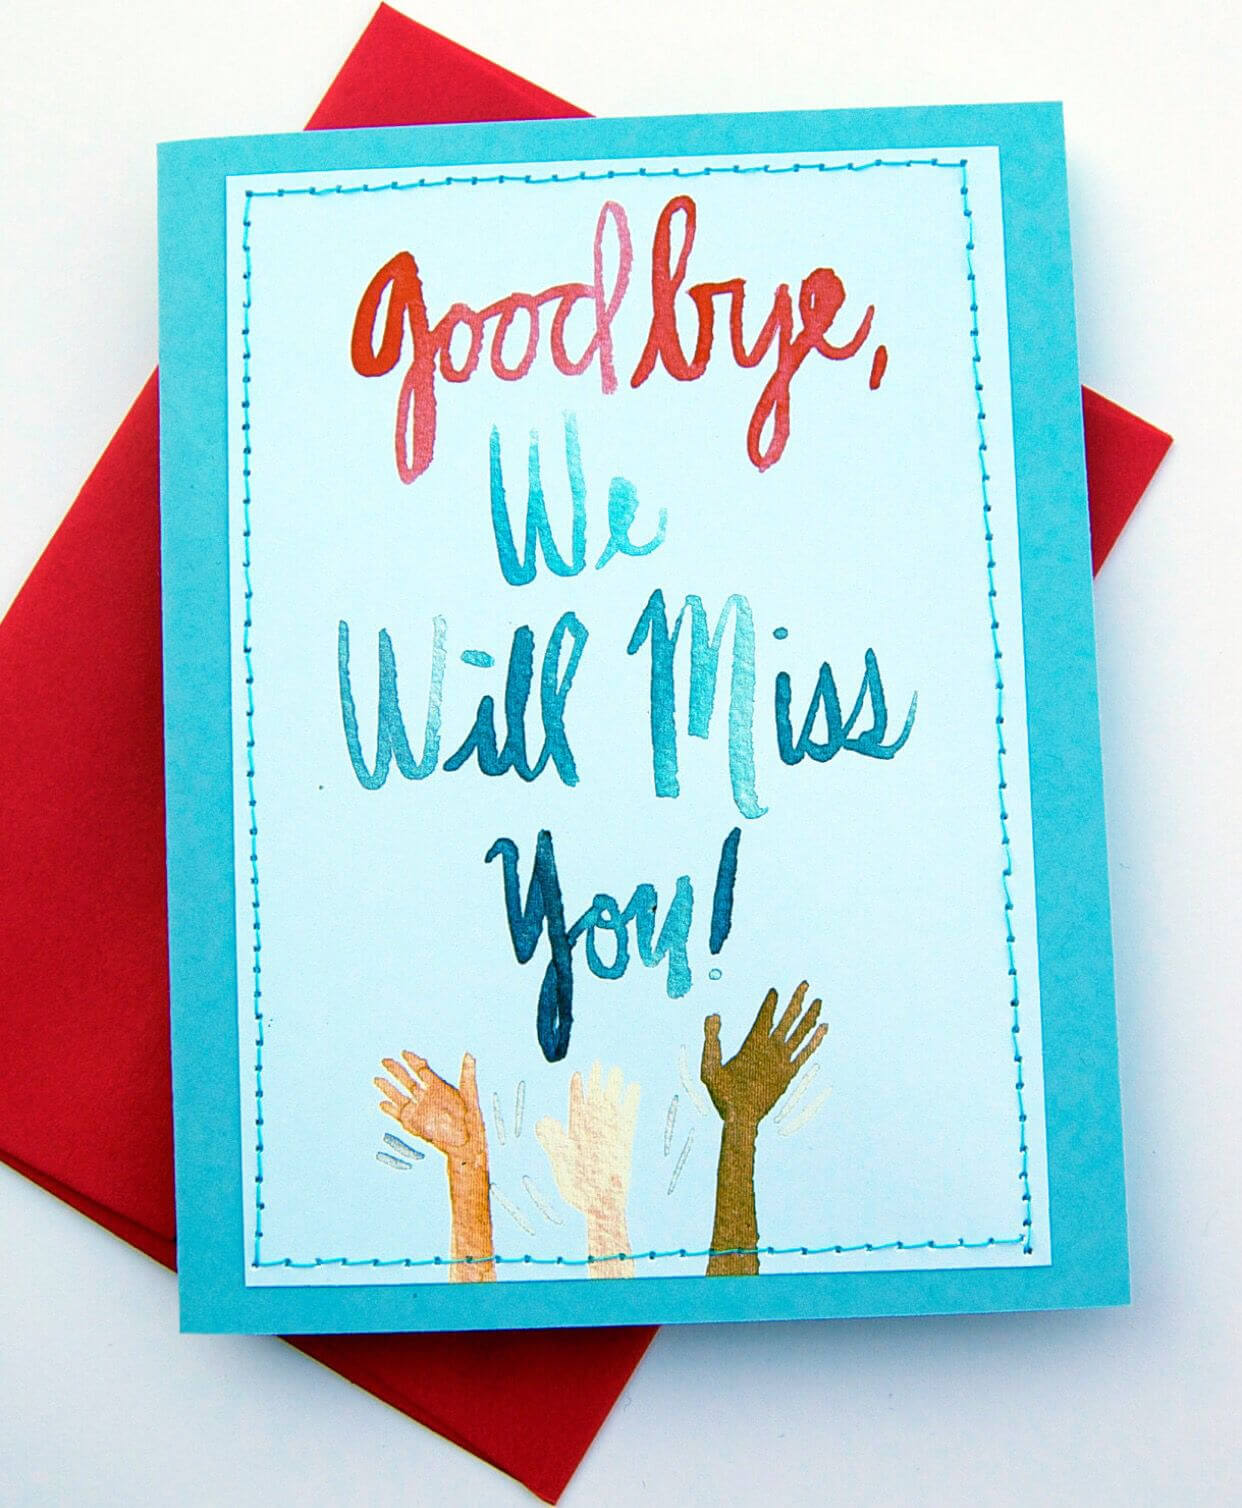 Good Bye! Will Miss You! | Student Teacher Relationship Throughout Sorry You Re Leaving Card Template